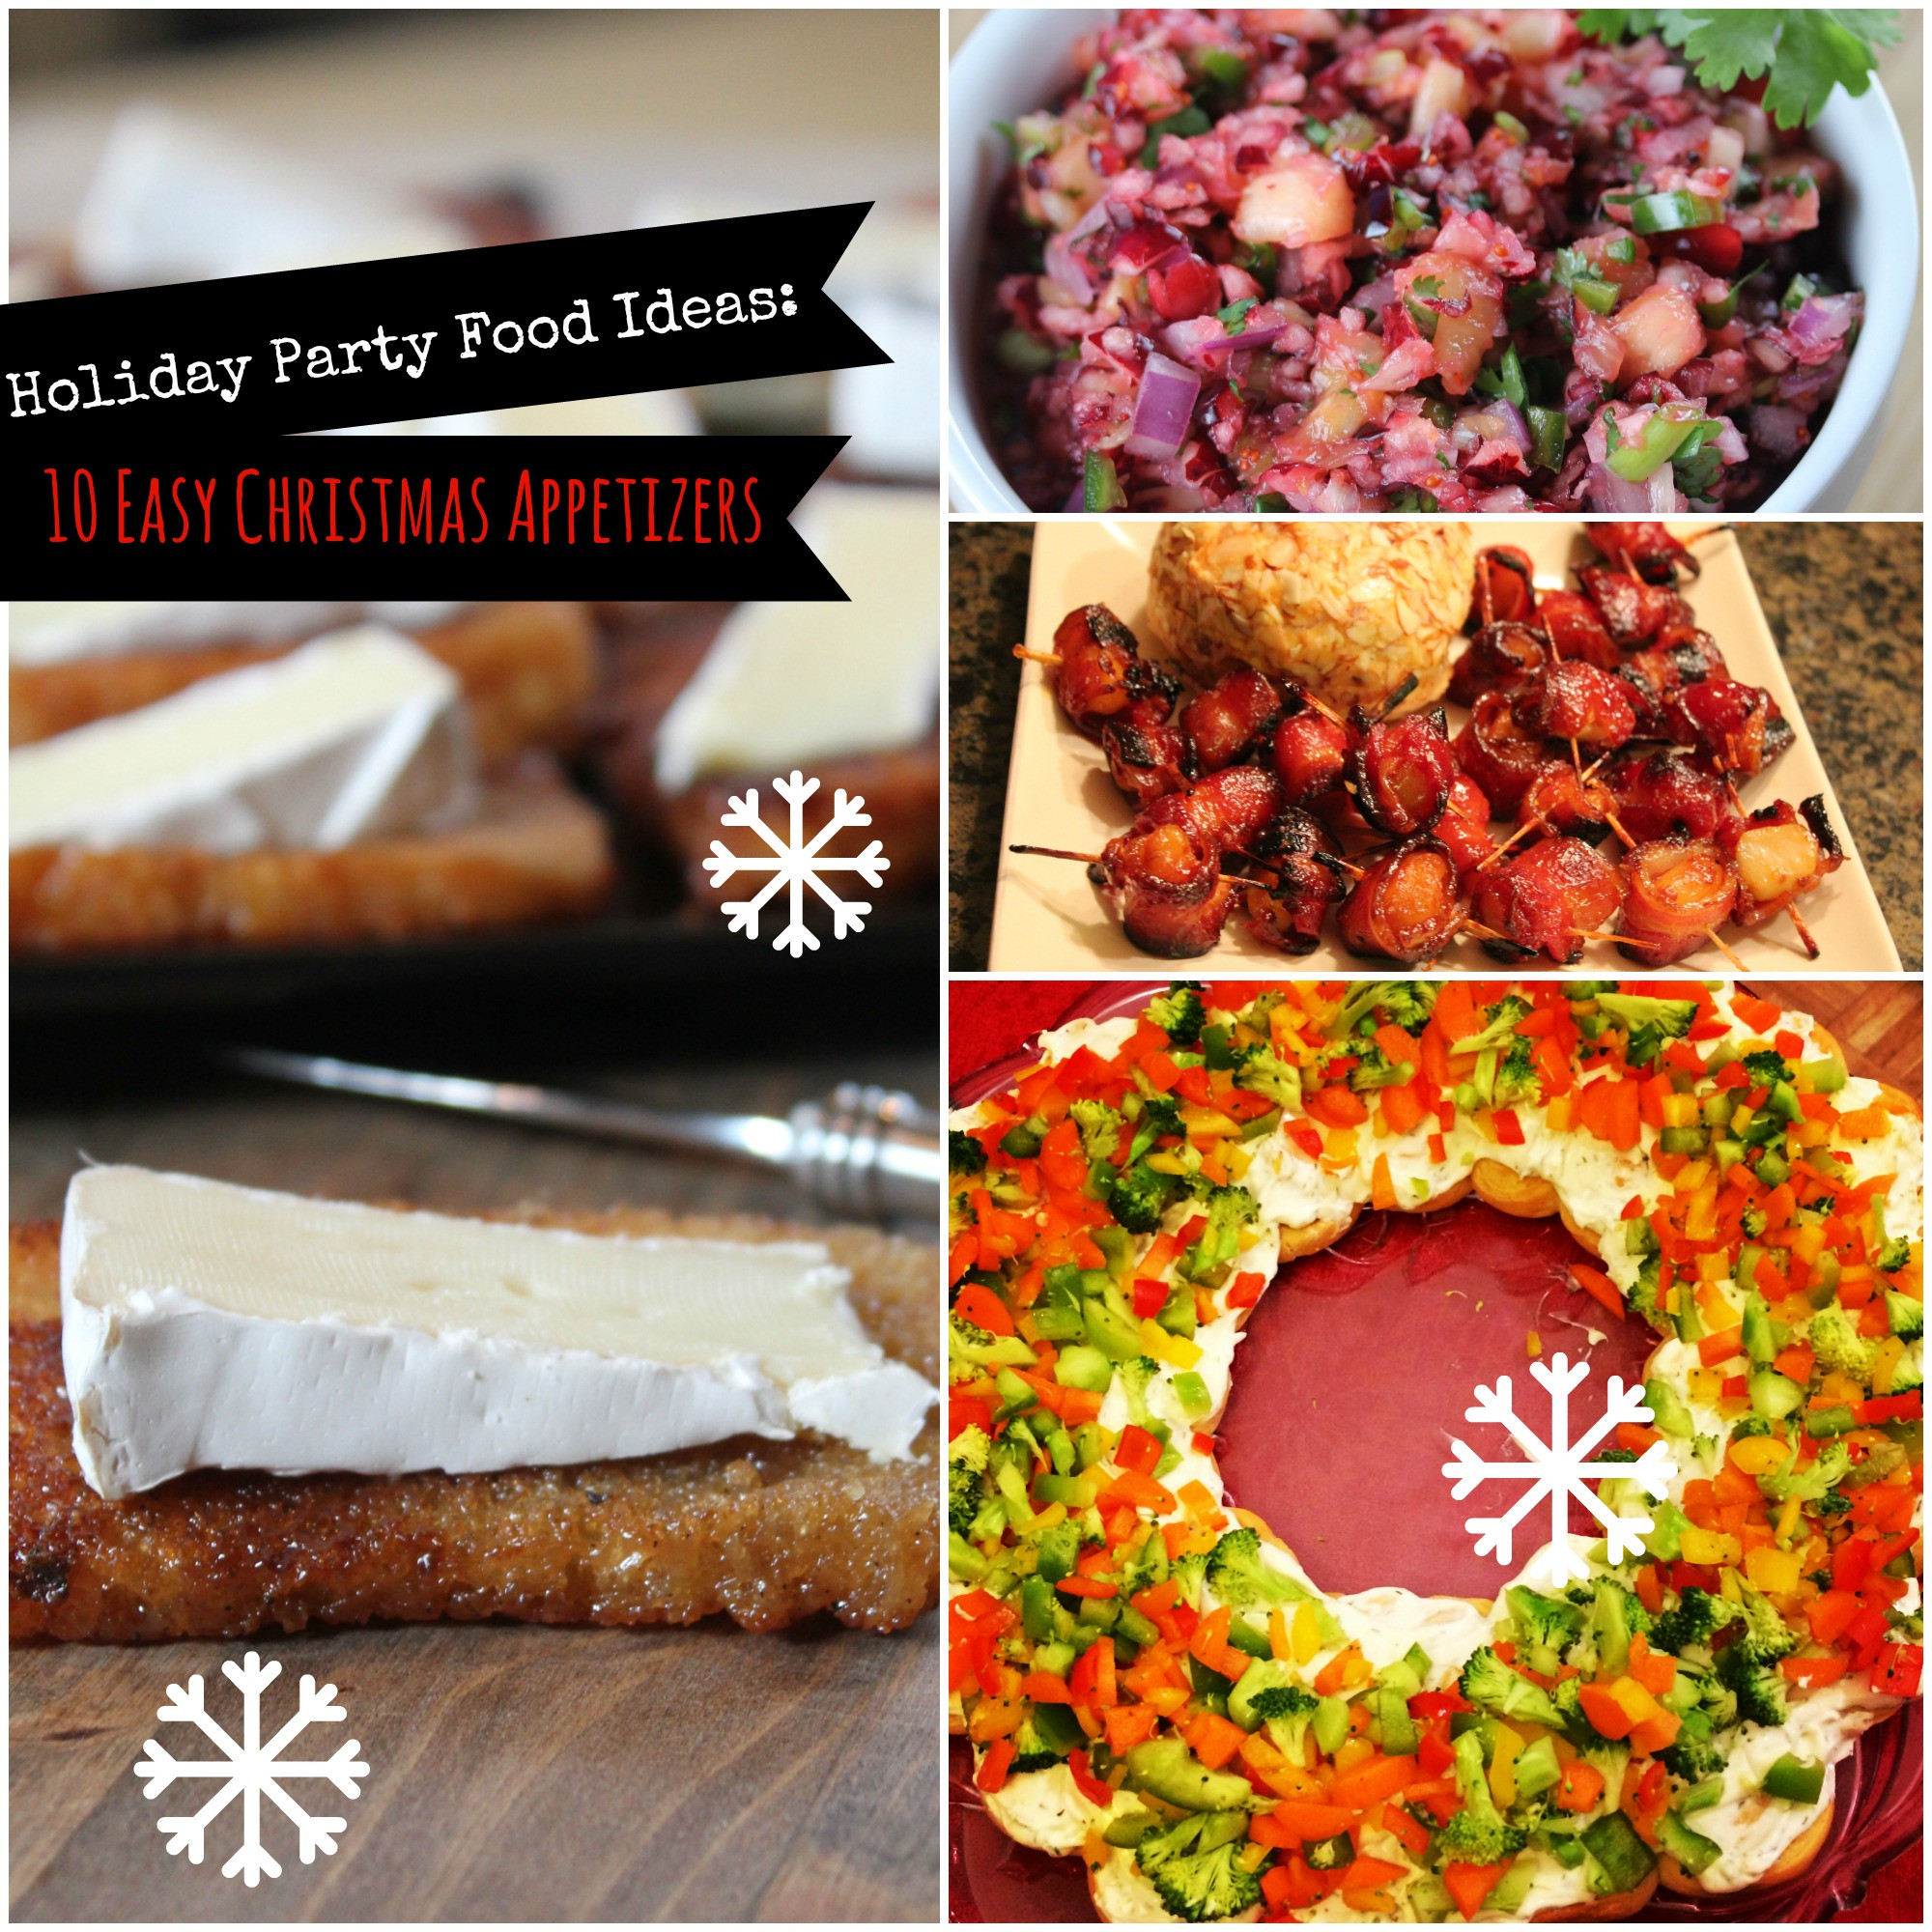 Holiday Food Ideas Christmas Party
 Holiday Party Food Ideas 10 Easy Christmas Appetizers